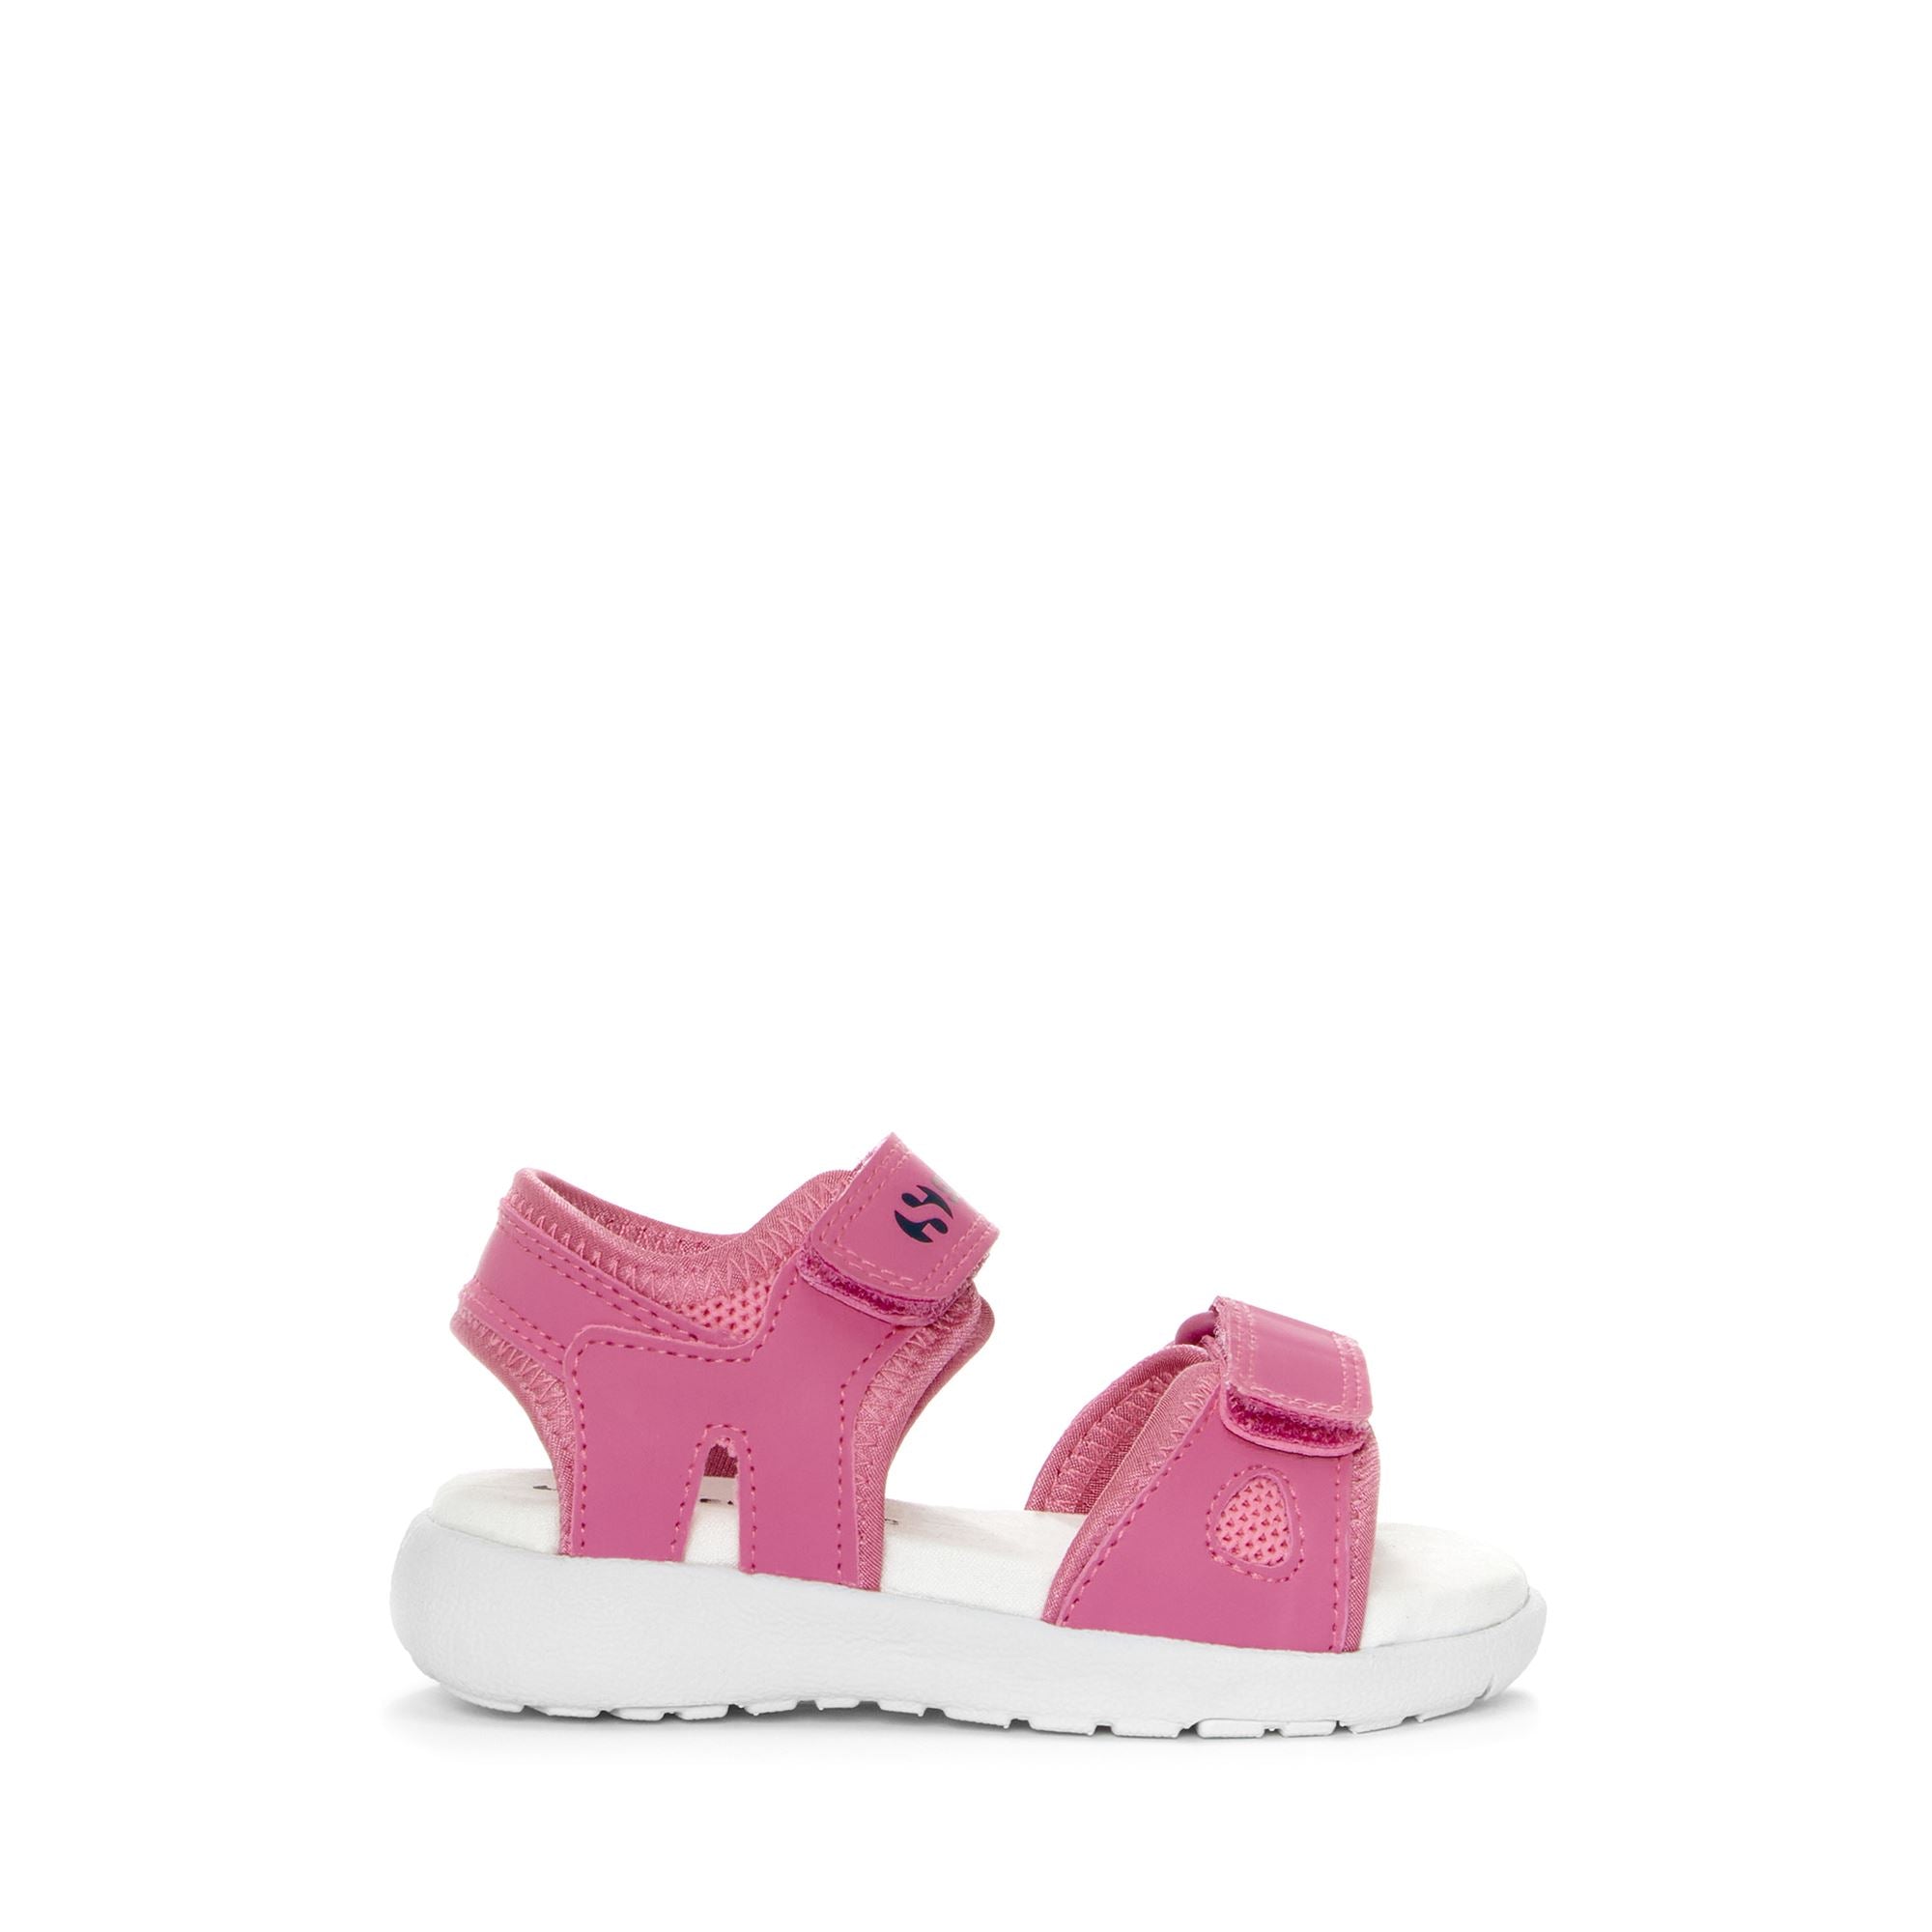 Sandals Kid unisex 3999 KIDS SYNTHETIC MATERIAL Sandal PINK 